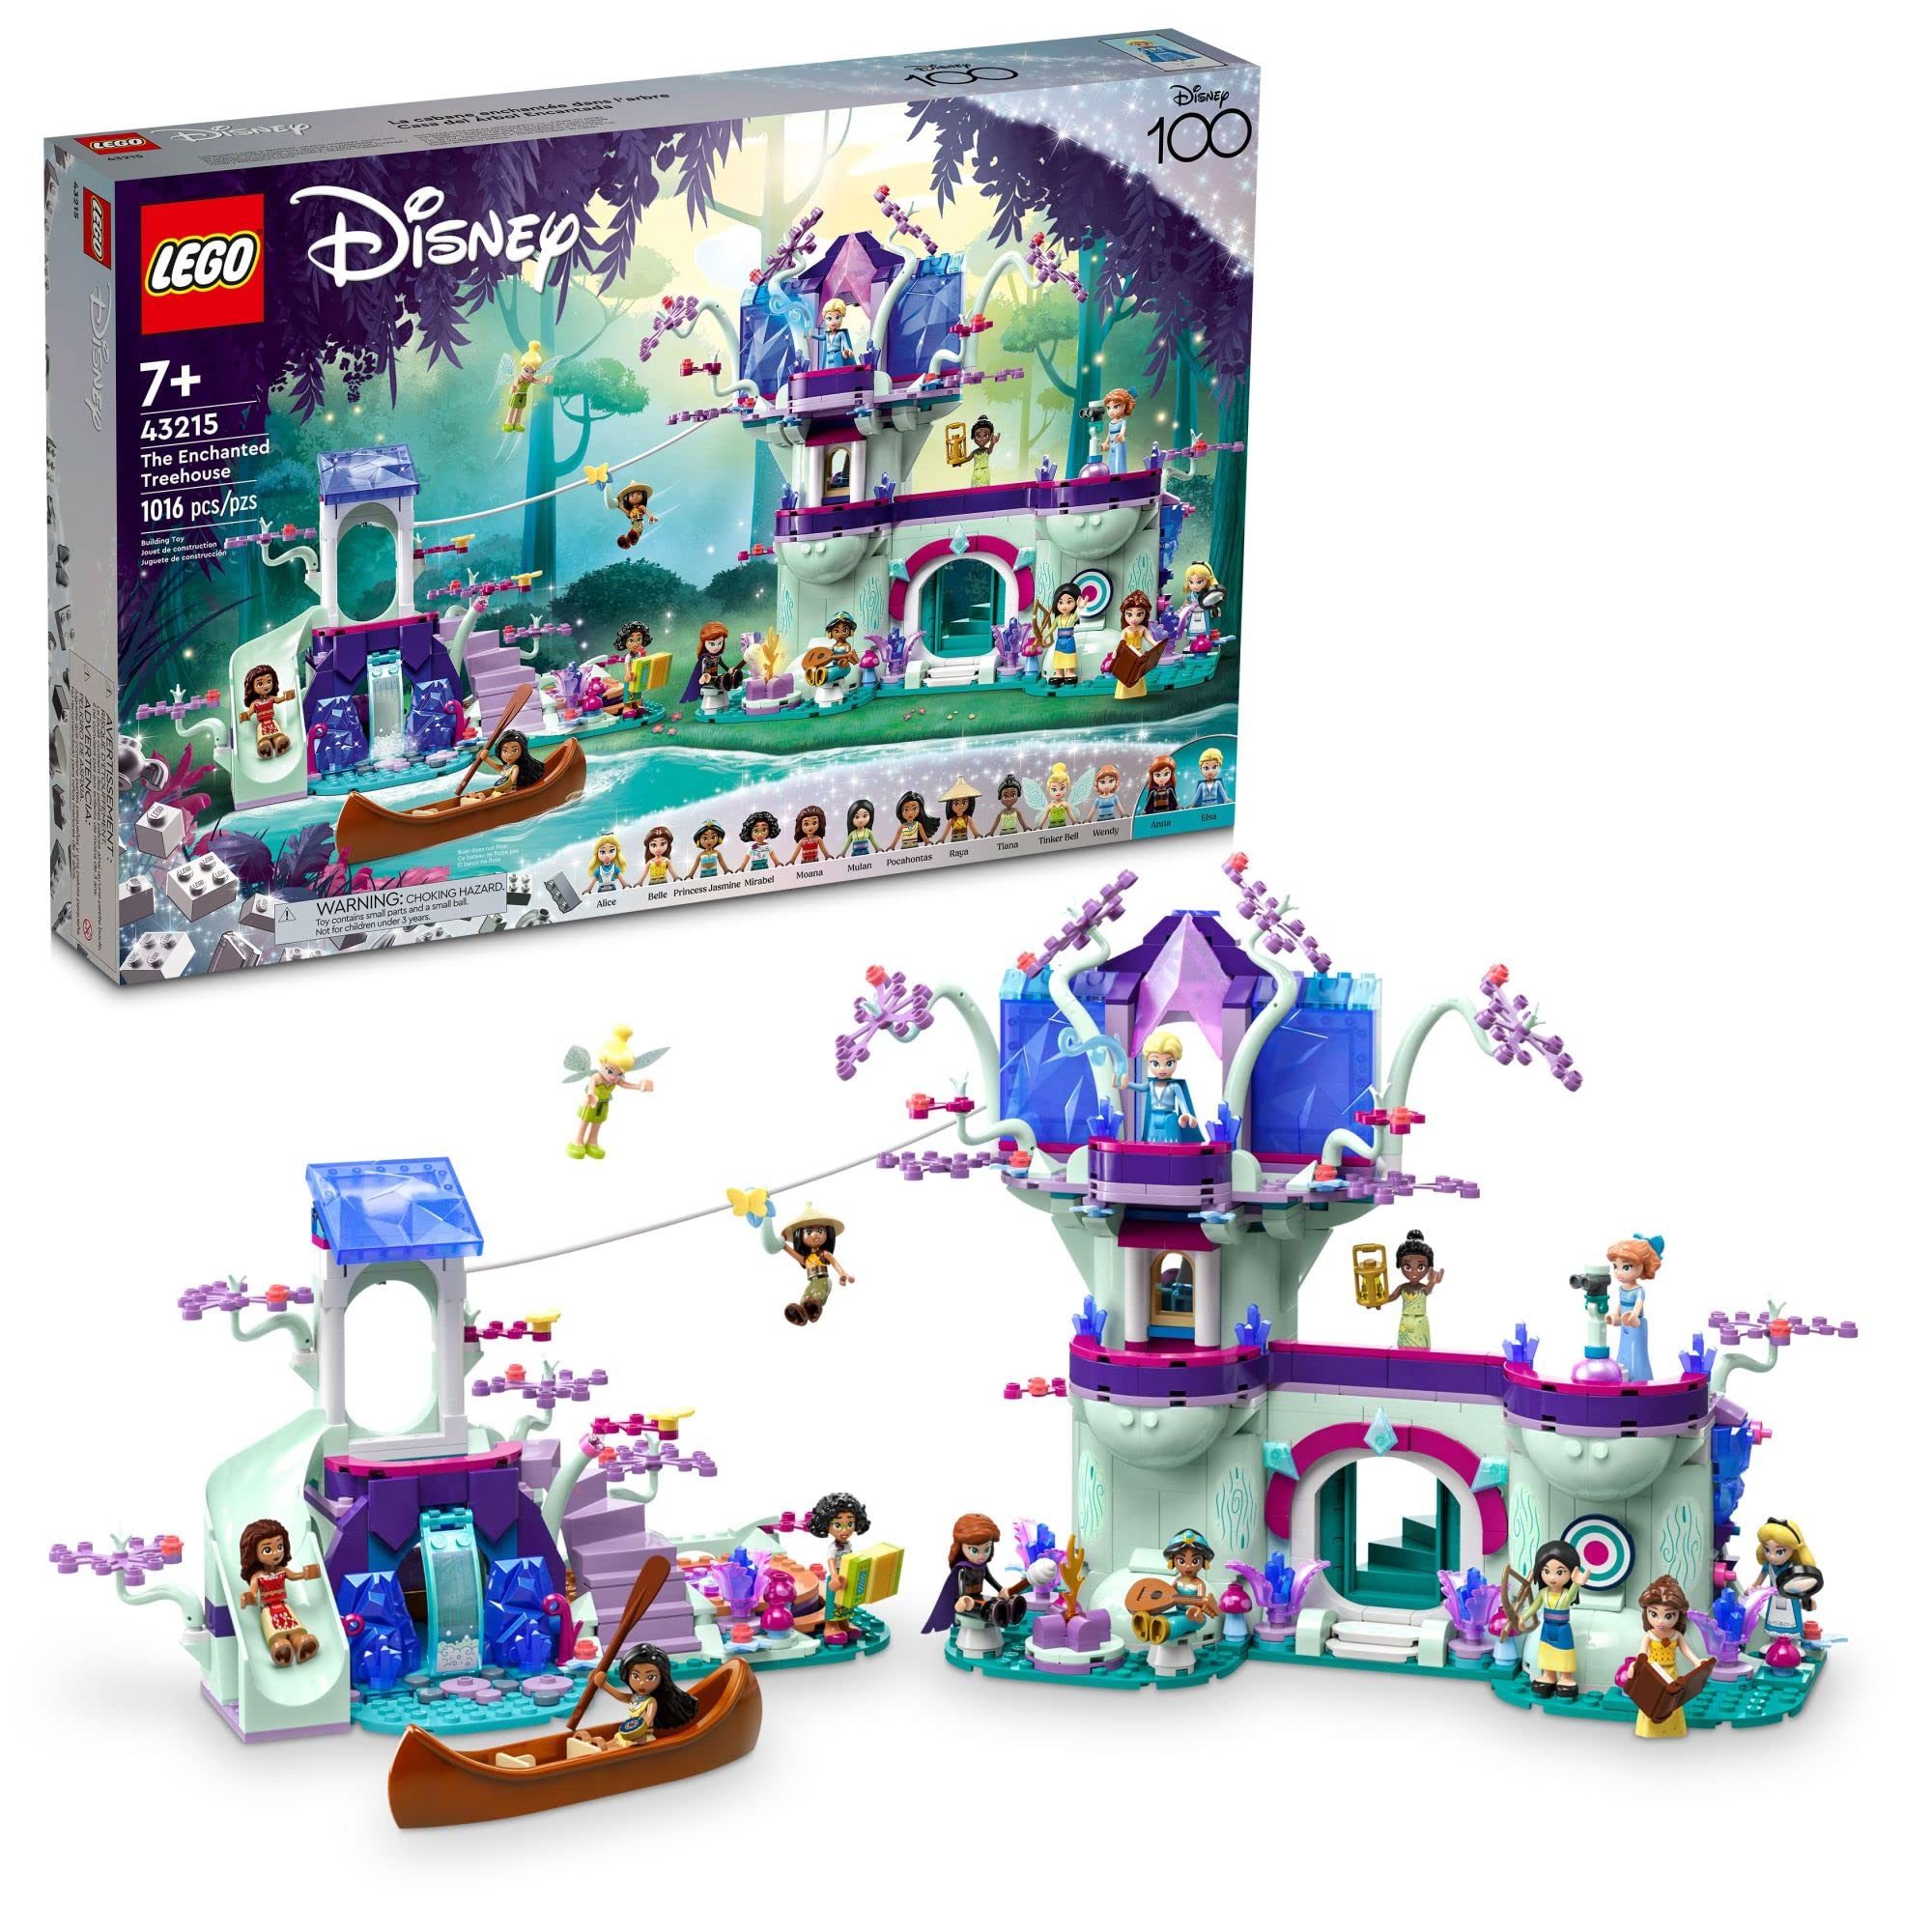 LEGO Disney The Enchanted Treehouse 43215 Buildable 2-Level Tree House with 13 Princess Mini-Dolls Such as Jasmine, Elsa and Moana, Classic Disney Christmas Toy for Disney Princess Fans Ages 7 and Up